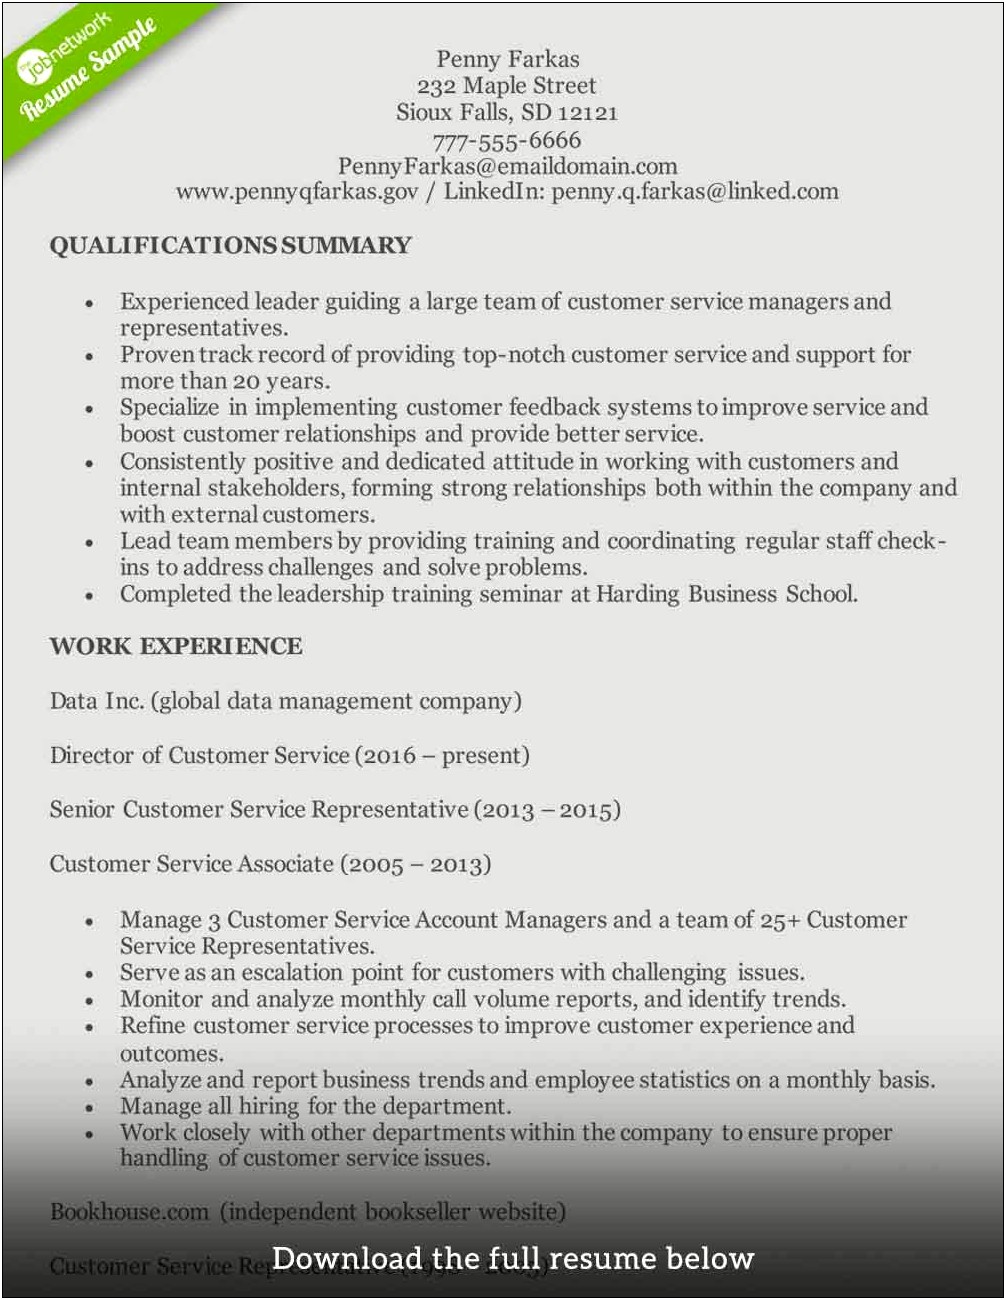 Resume Examples For Customer Service Skills And Expertise